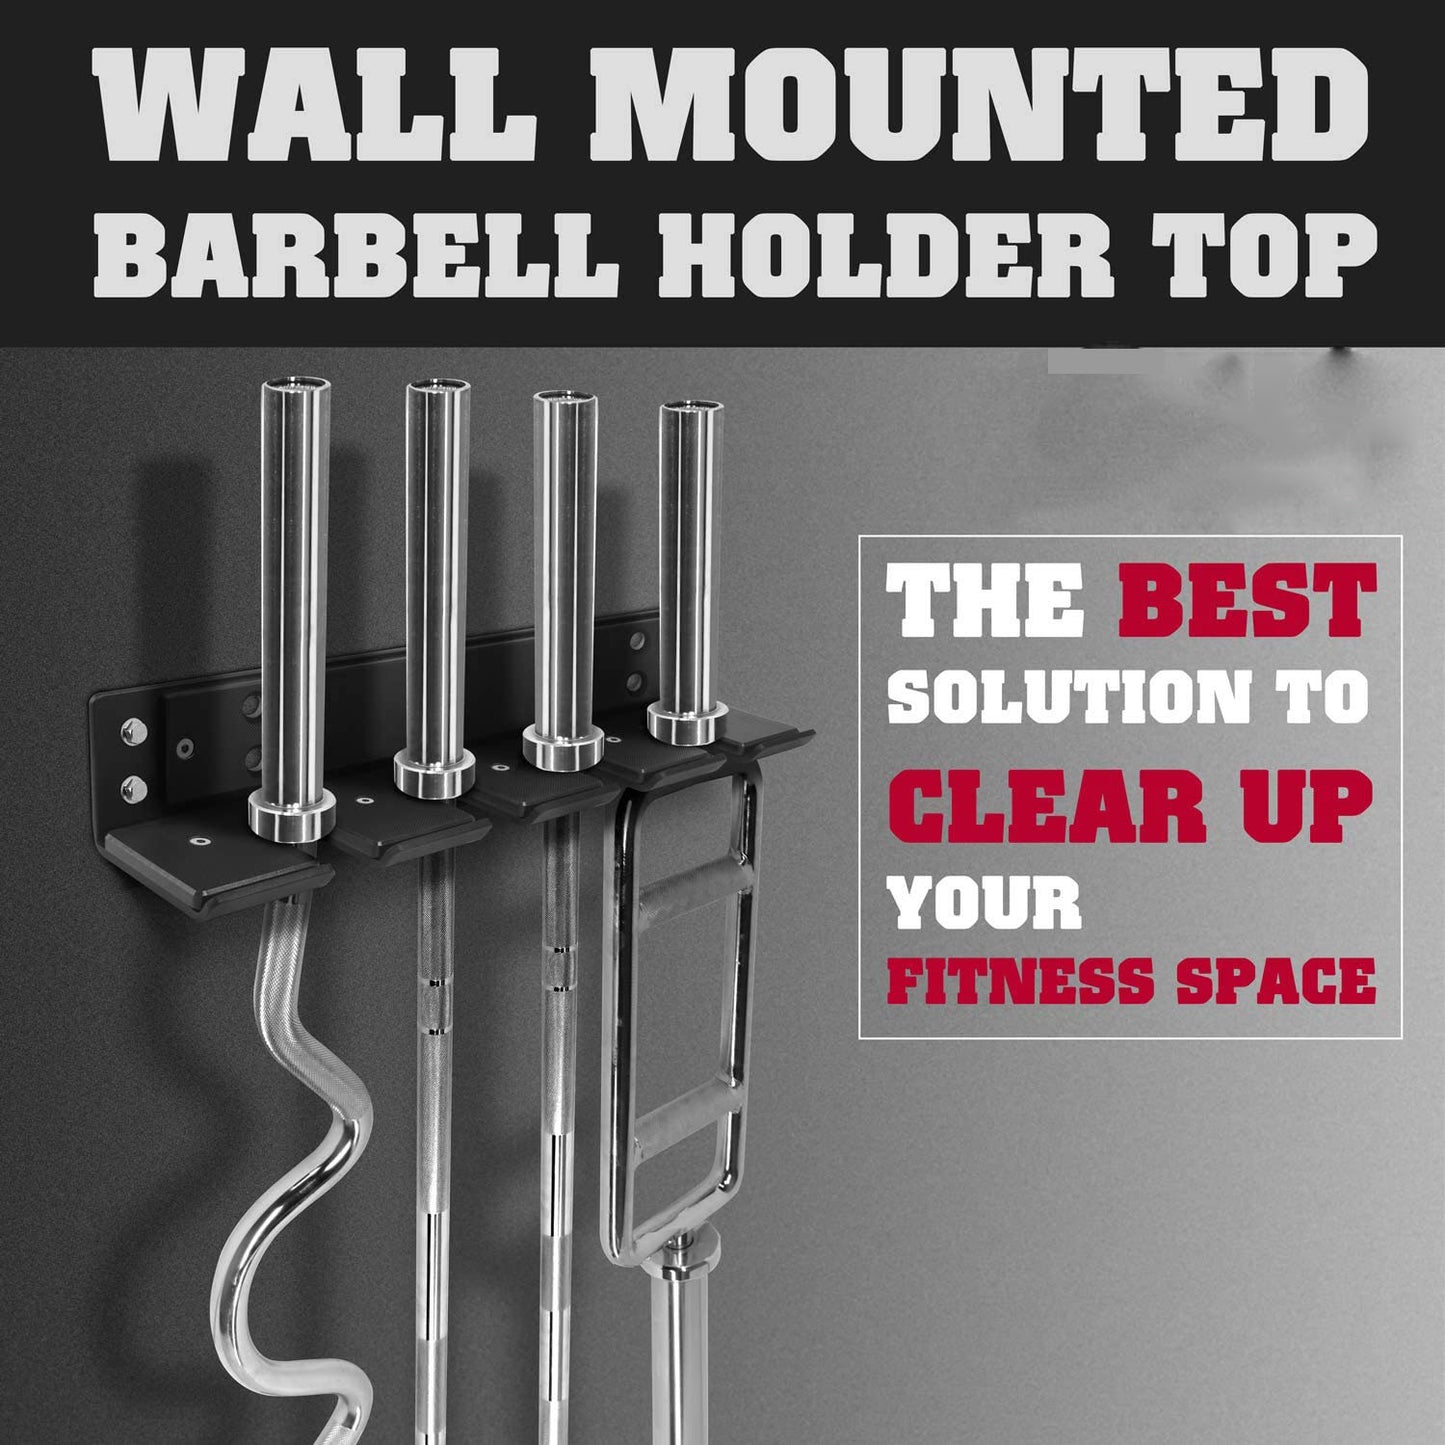 Wall Mounted Barbell Rack Vertical